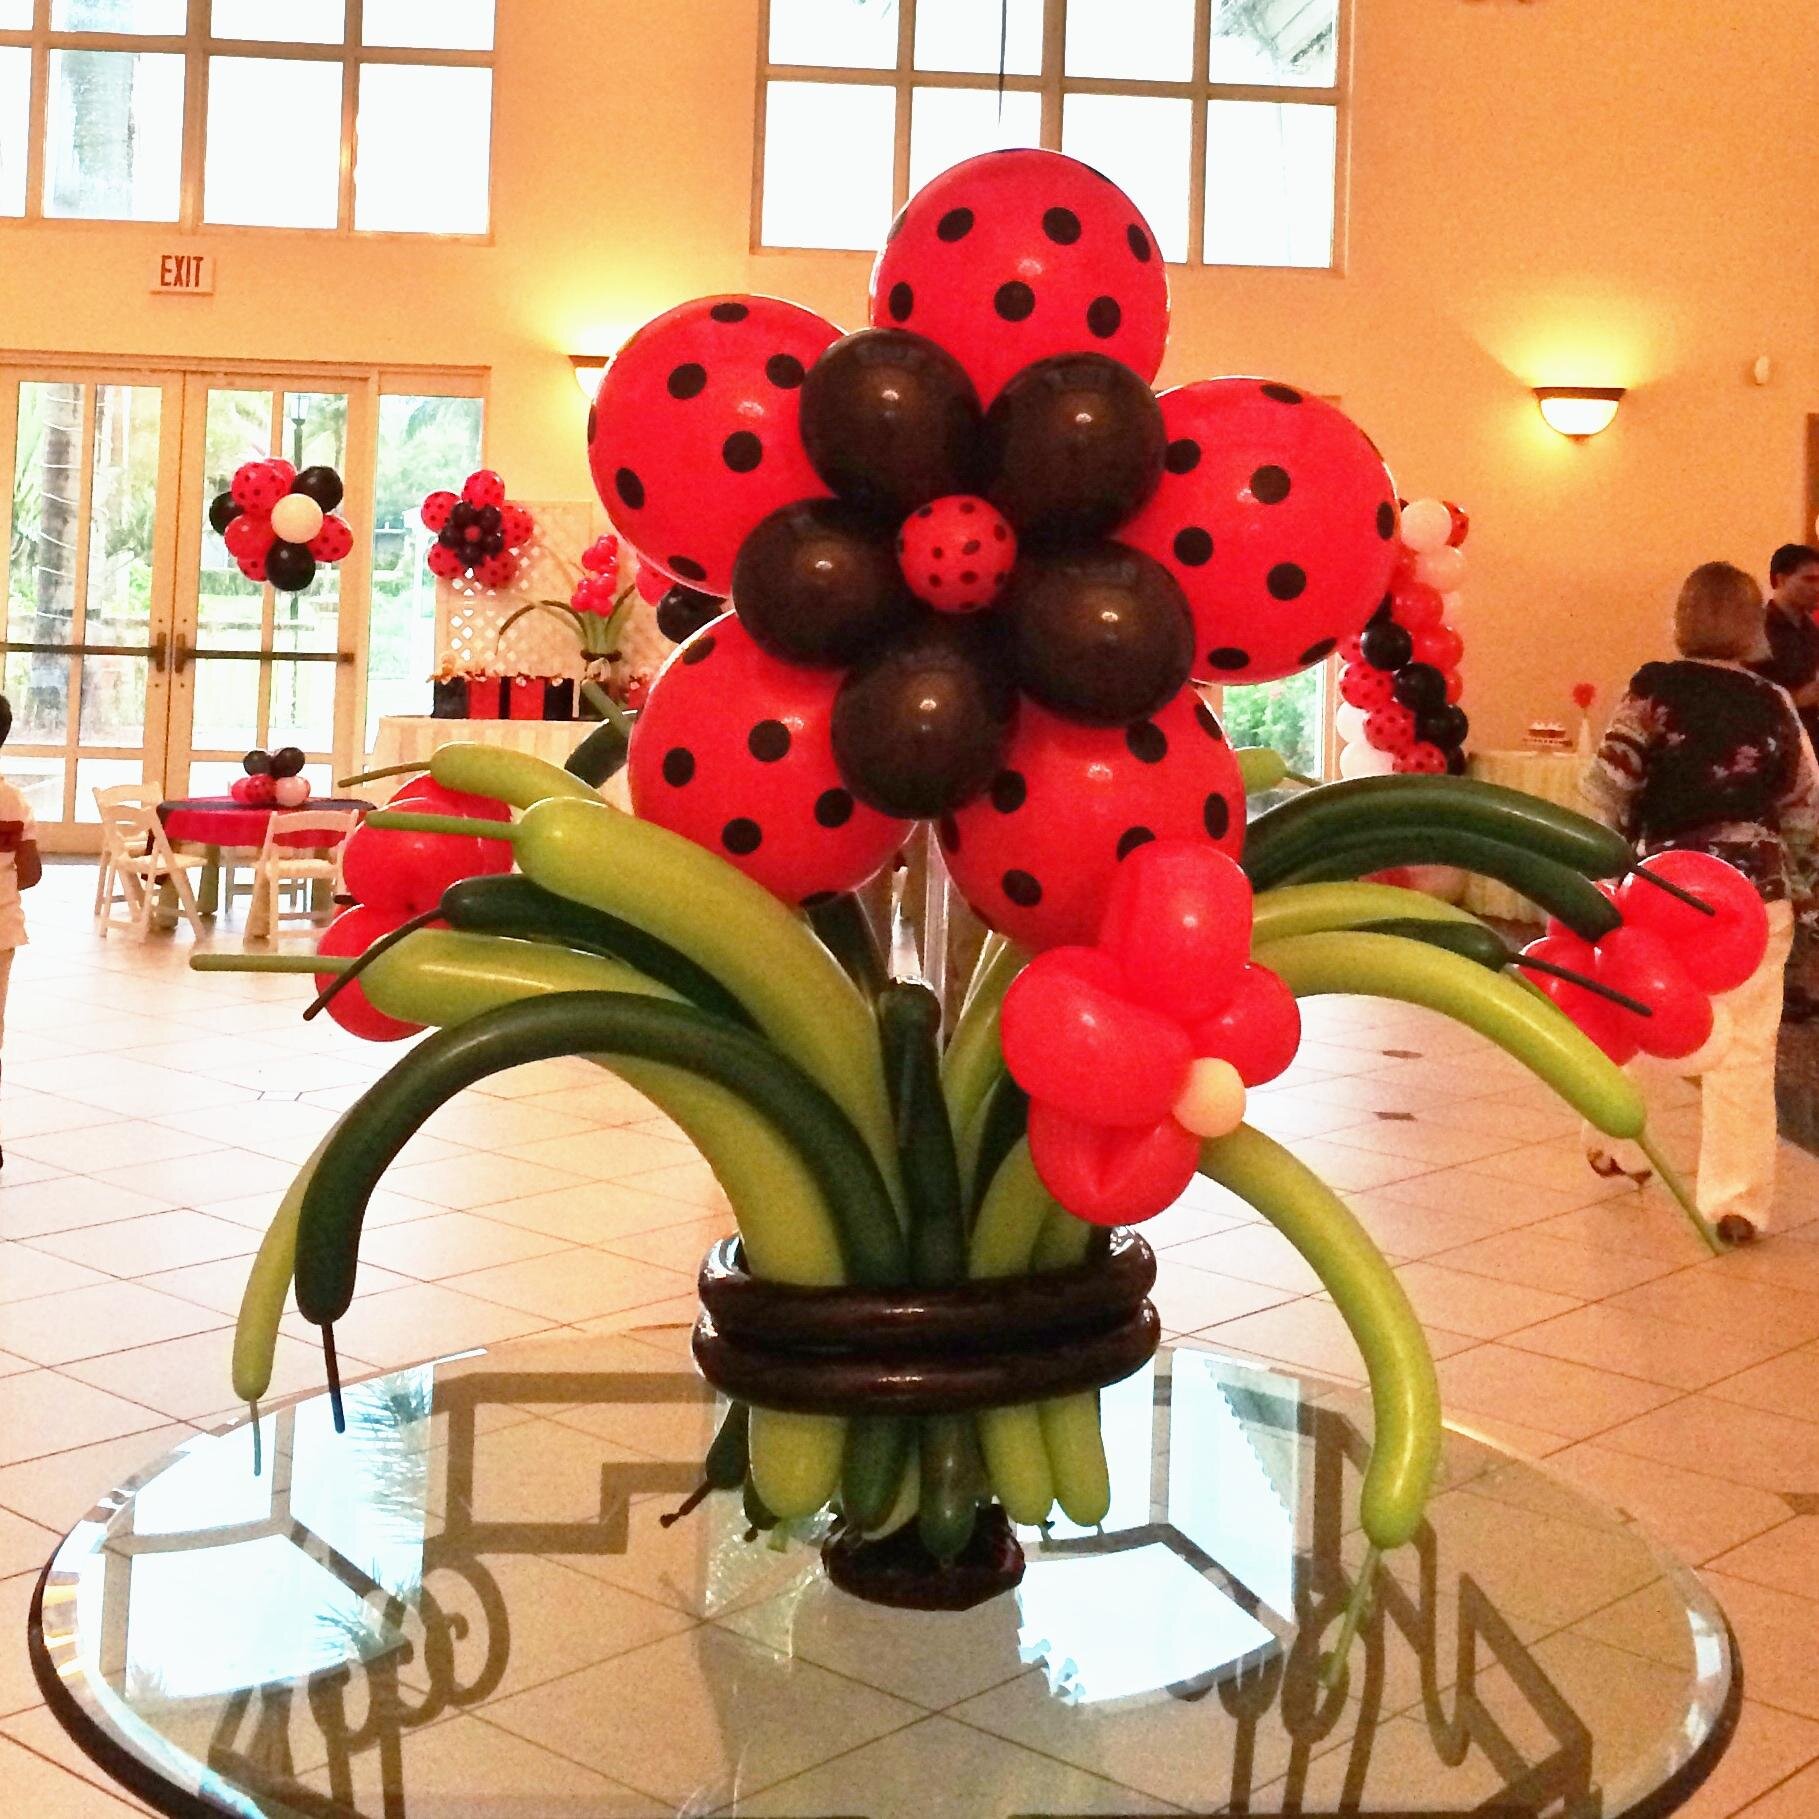 We offer balloon decorations for all type of events, Arch balloons, Columns, helium balloons and More! Call Today for a Free Estimate (786) 970-3517